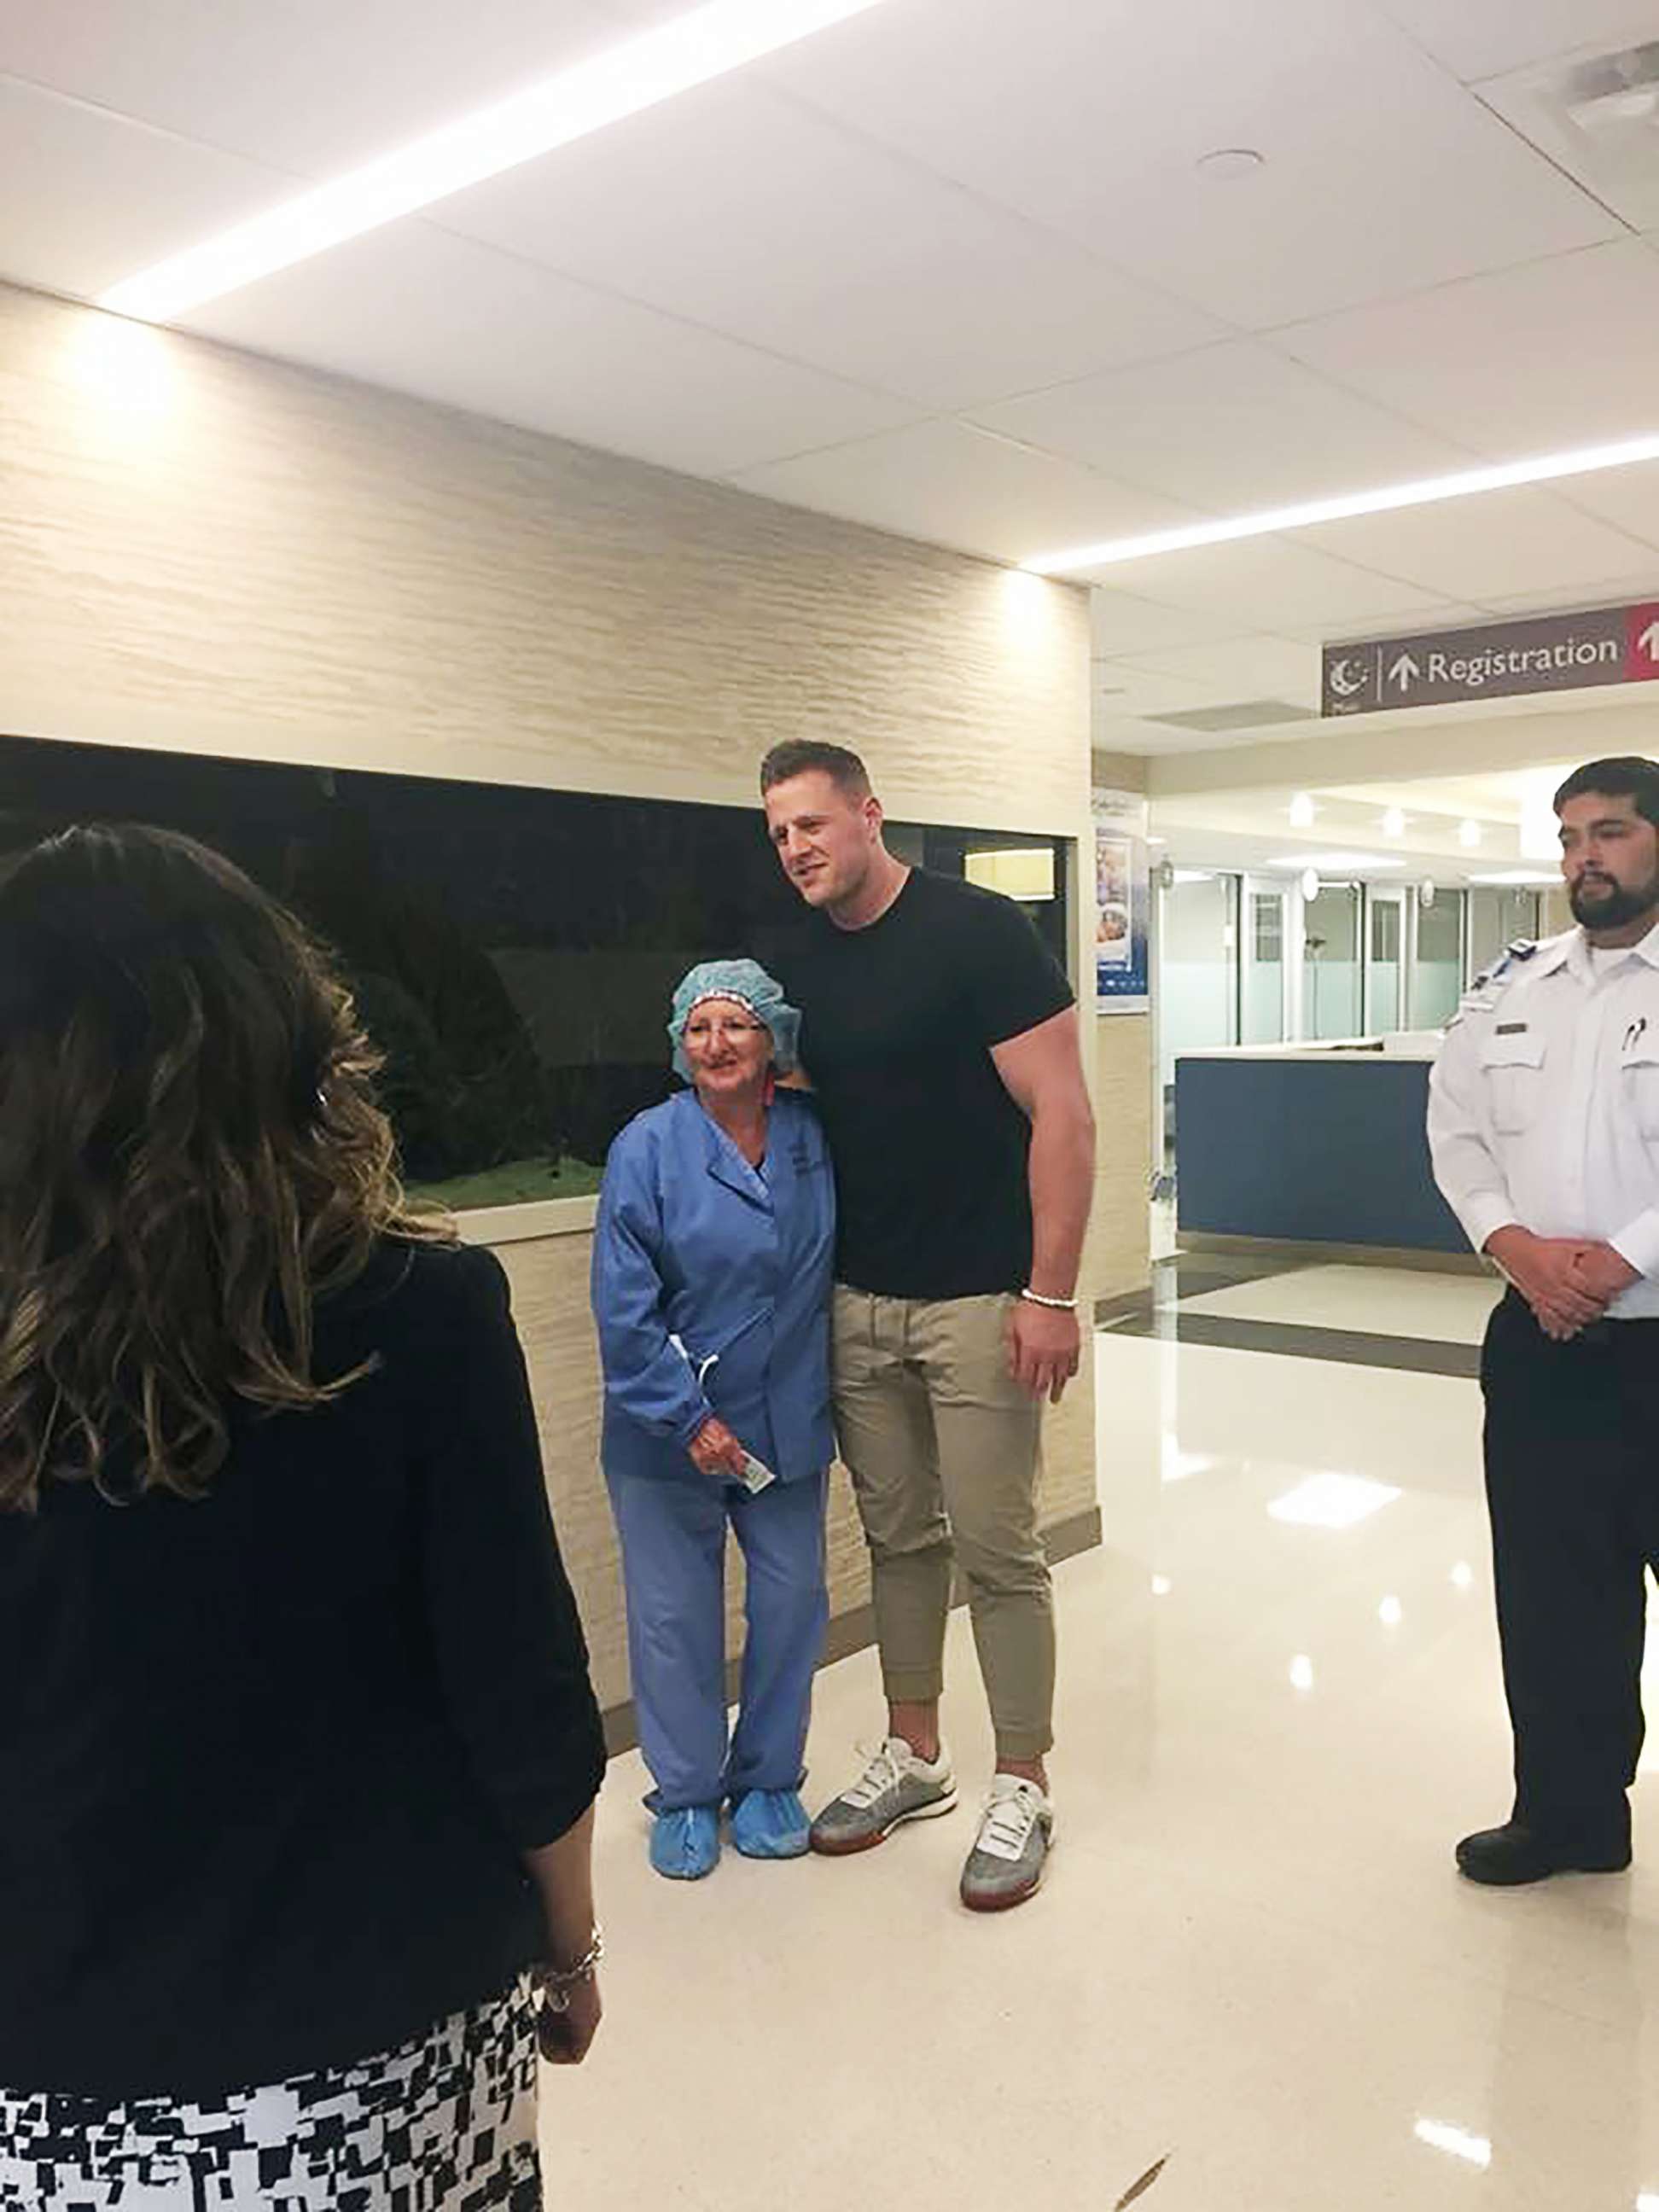 PHOTO: Houston Texans' star J.J. Watt visited with survivors of the Santa Fe High School shooting at Clear Lake Regional Medical Center on May 22, 2018, and stopped to take photos with nurses who have been working to care for the wounded.